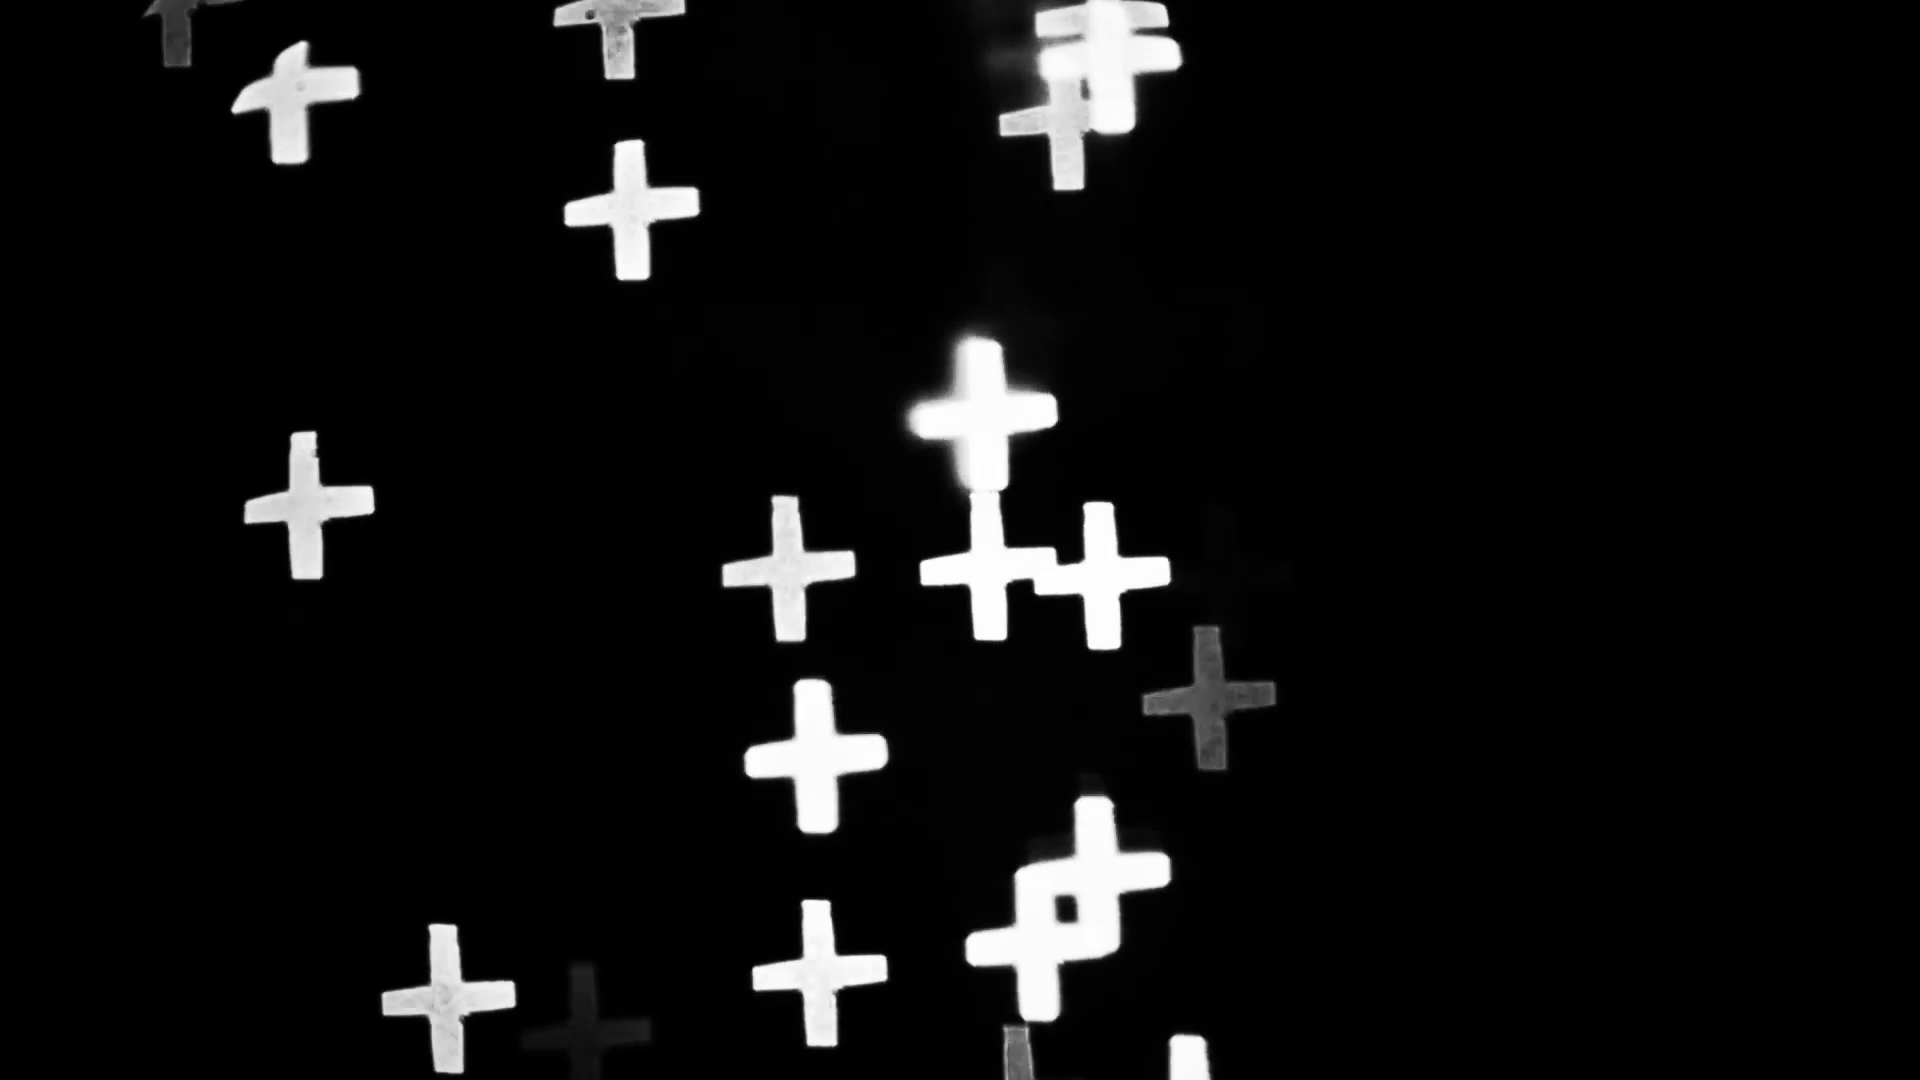 vj Video Black Background With Ornament With White Crosses Glowing